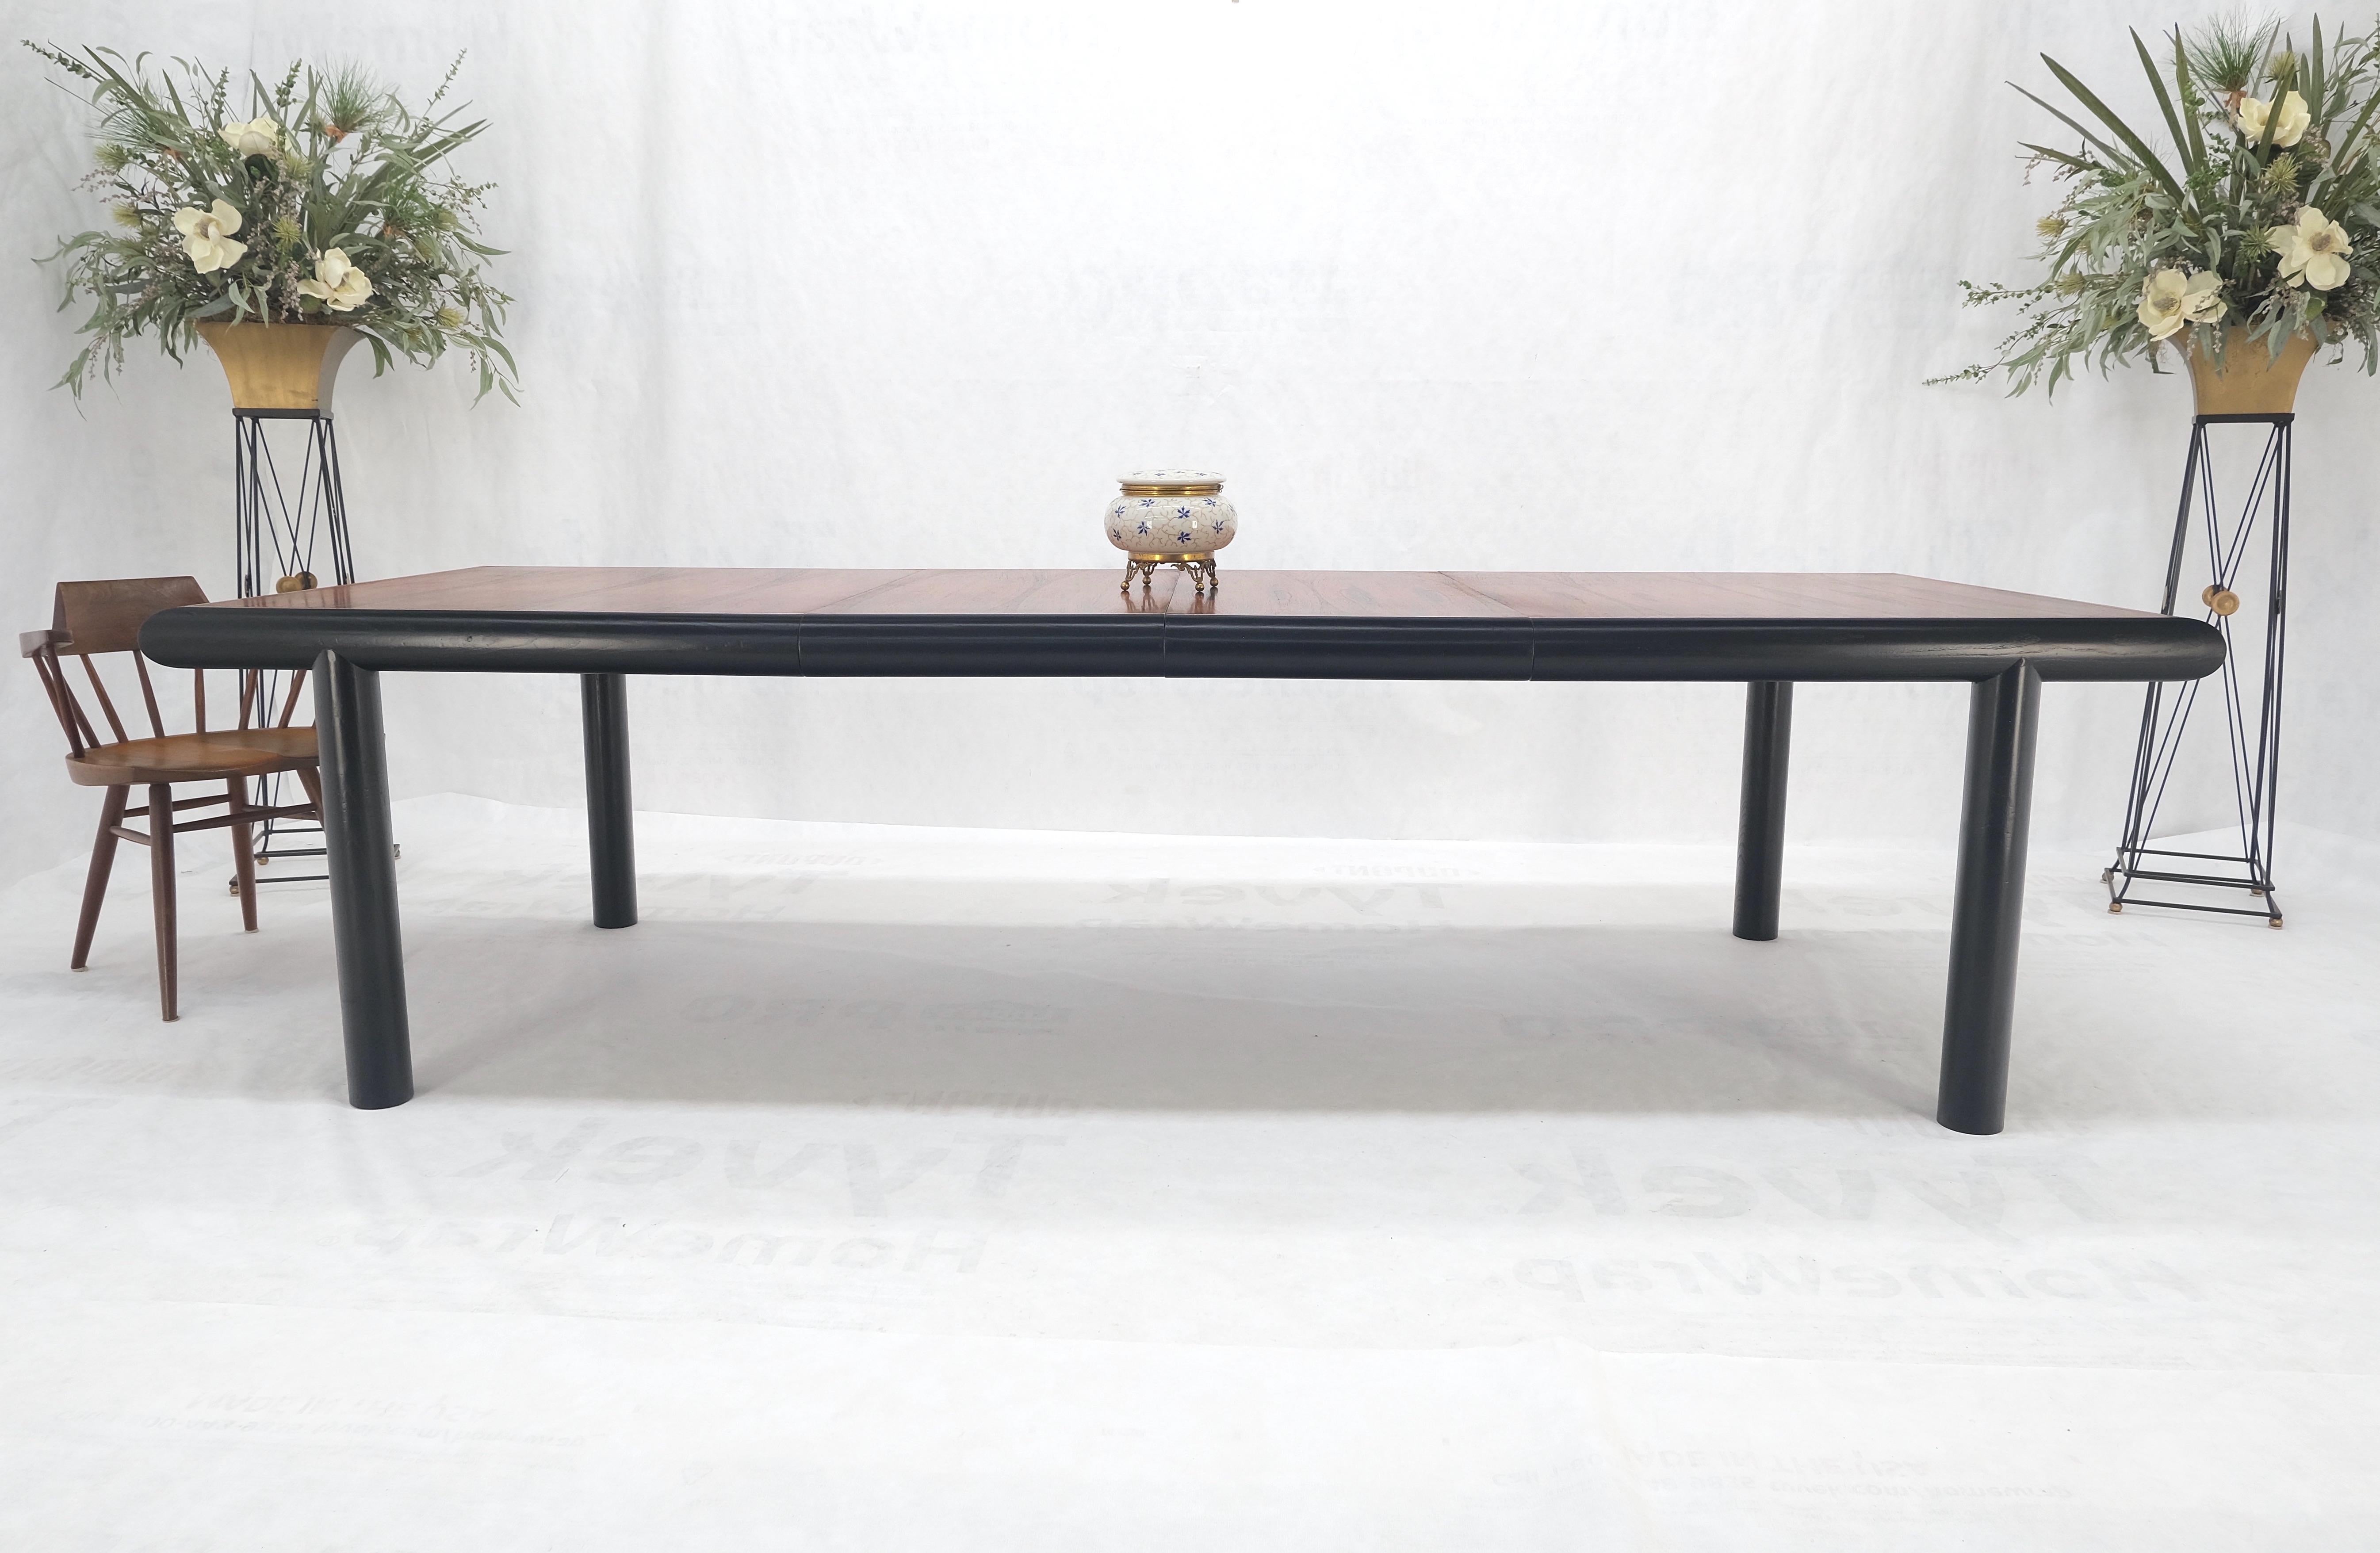 Rosewood Top Black Lacquer Base Massive Cylinder Shape Legs Dining Table MINT! For Sale 5